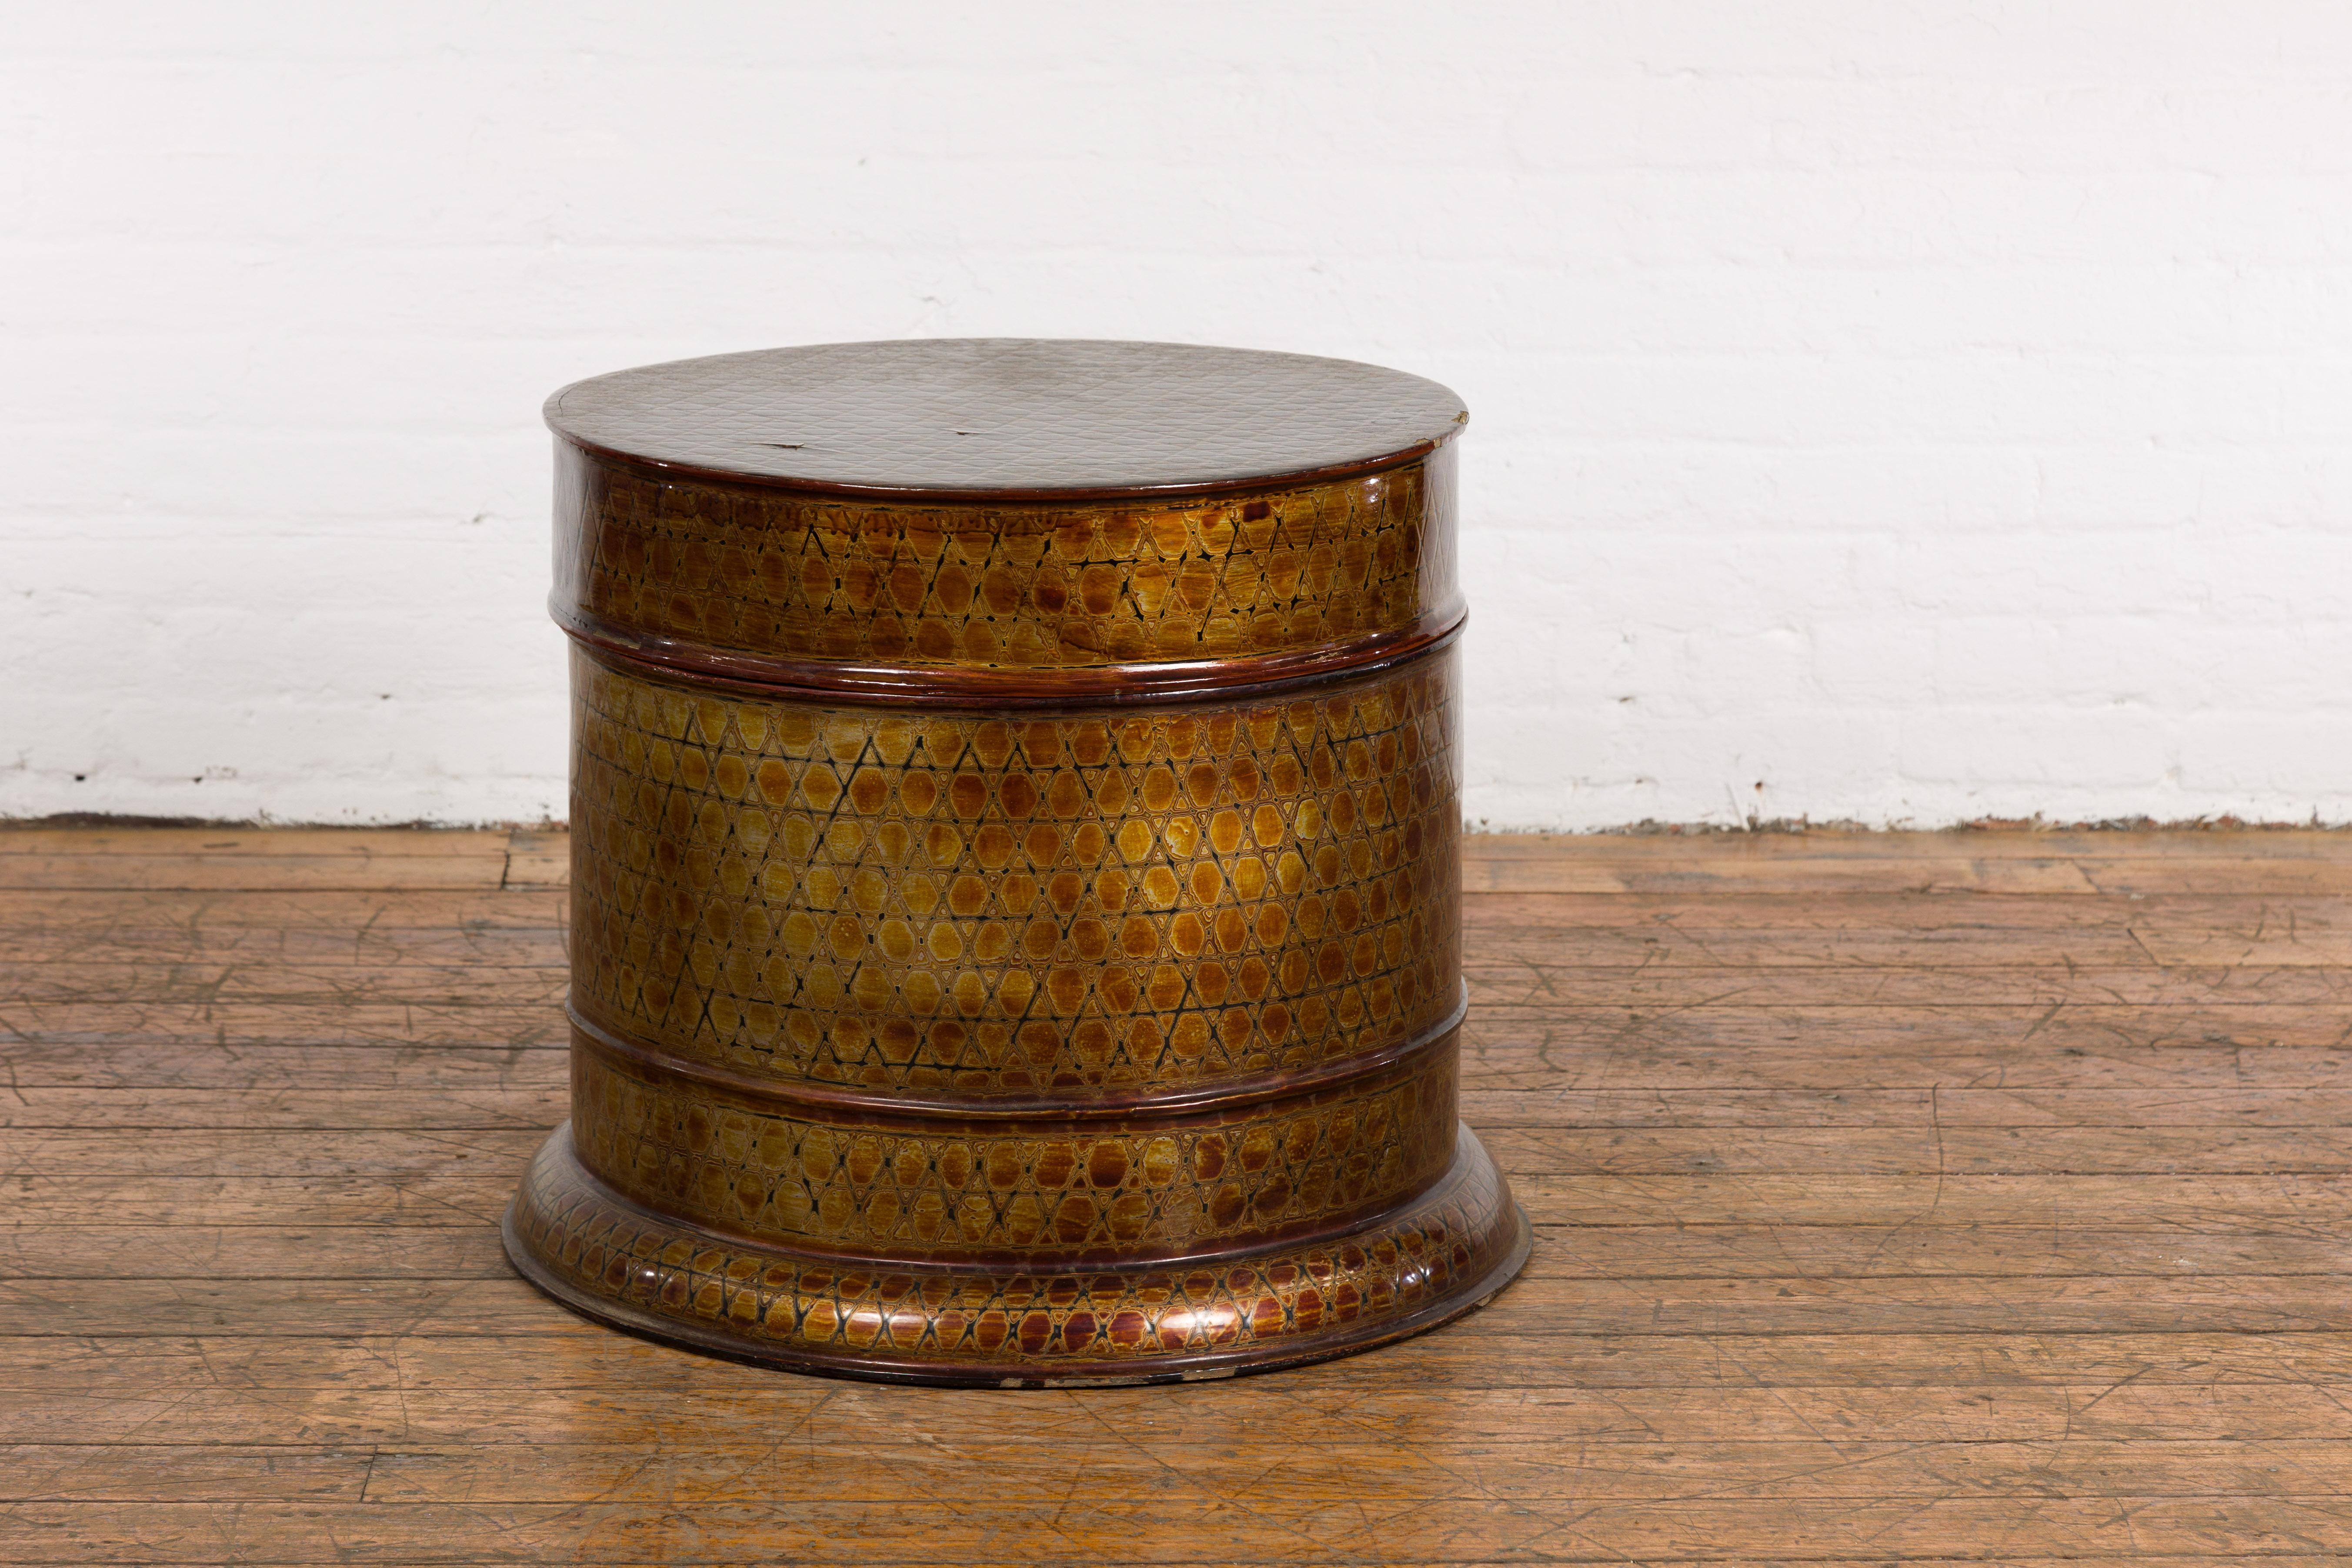 A vintage Thai negora lacquer round storage lidded bin box from the mid-20th century, with snake skin patterns. This vintage Thai negora lacquer round storage lidded bin box from the mid-20th century features elegant patterns, and combines both form